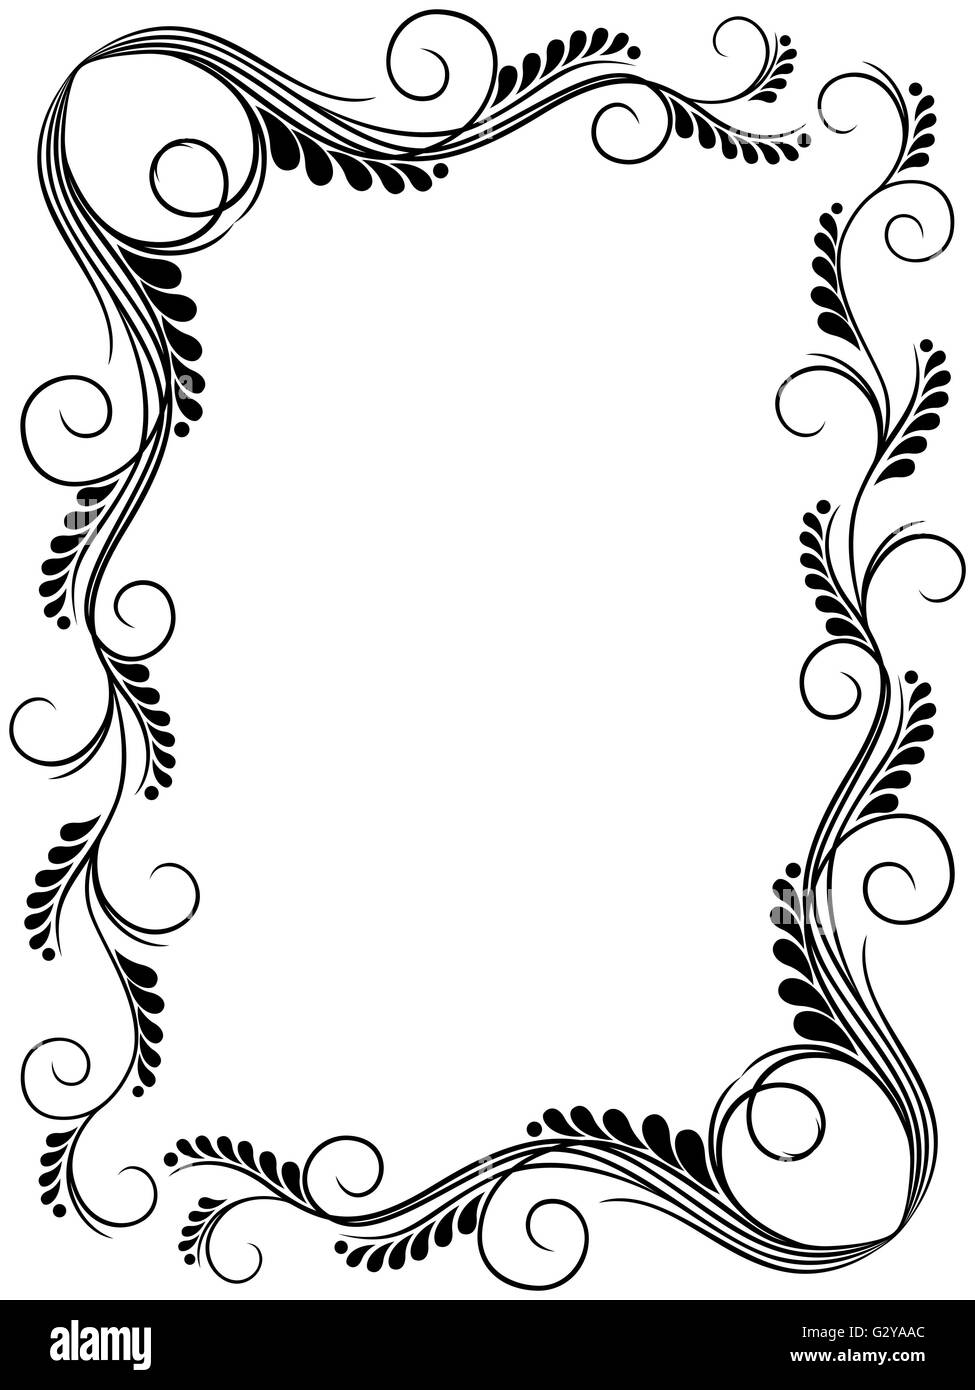 Abstract floral black and white frame ornamental frame, vector illustration Stock Vector